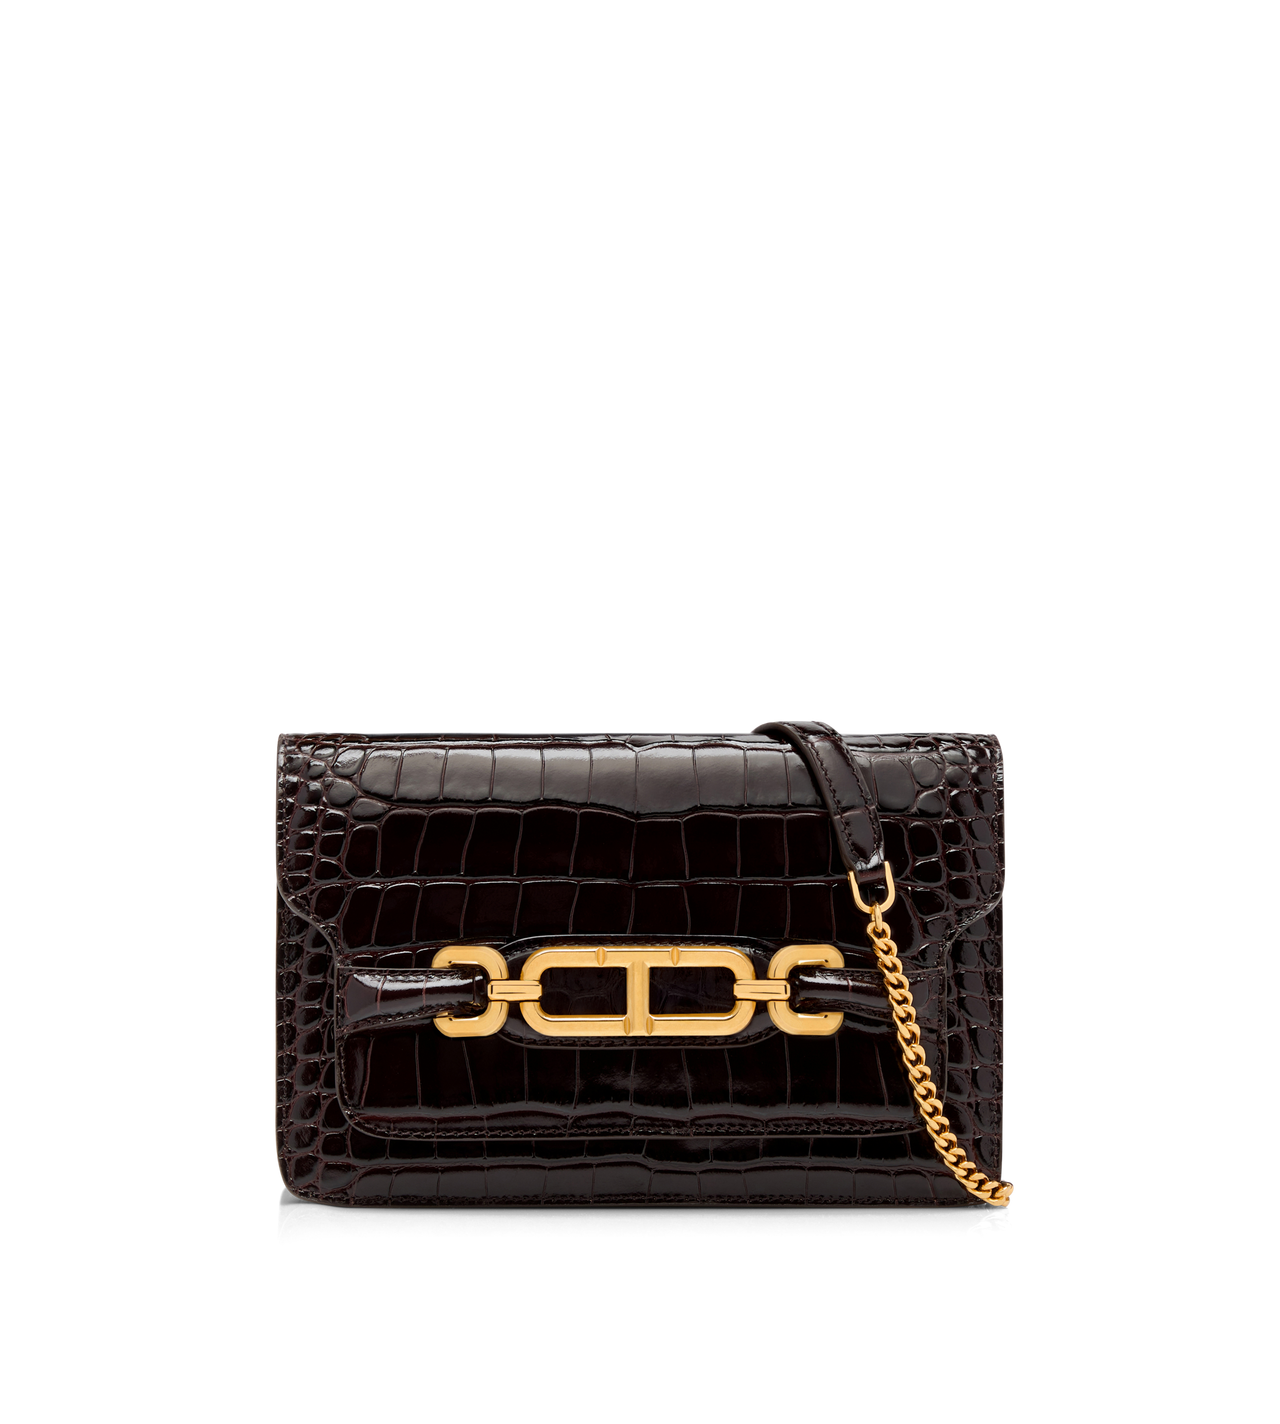 STAMPED CROCODILE LEATHER WHITNEY SMALL SHOULDER BAG